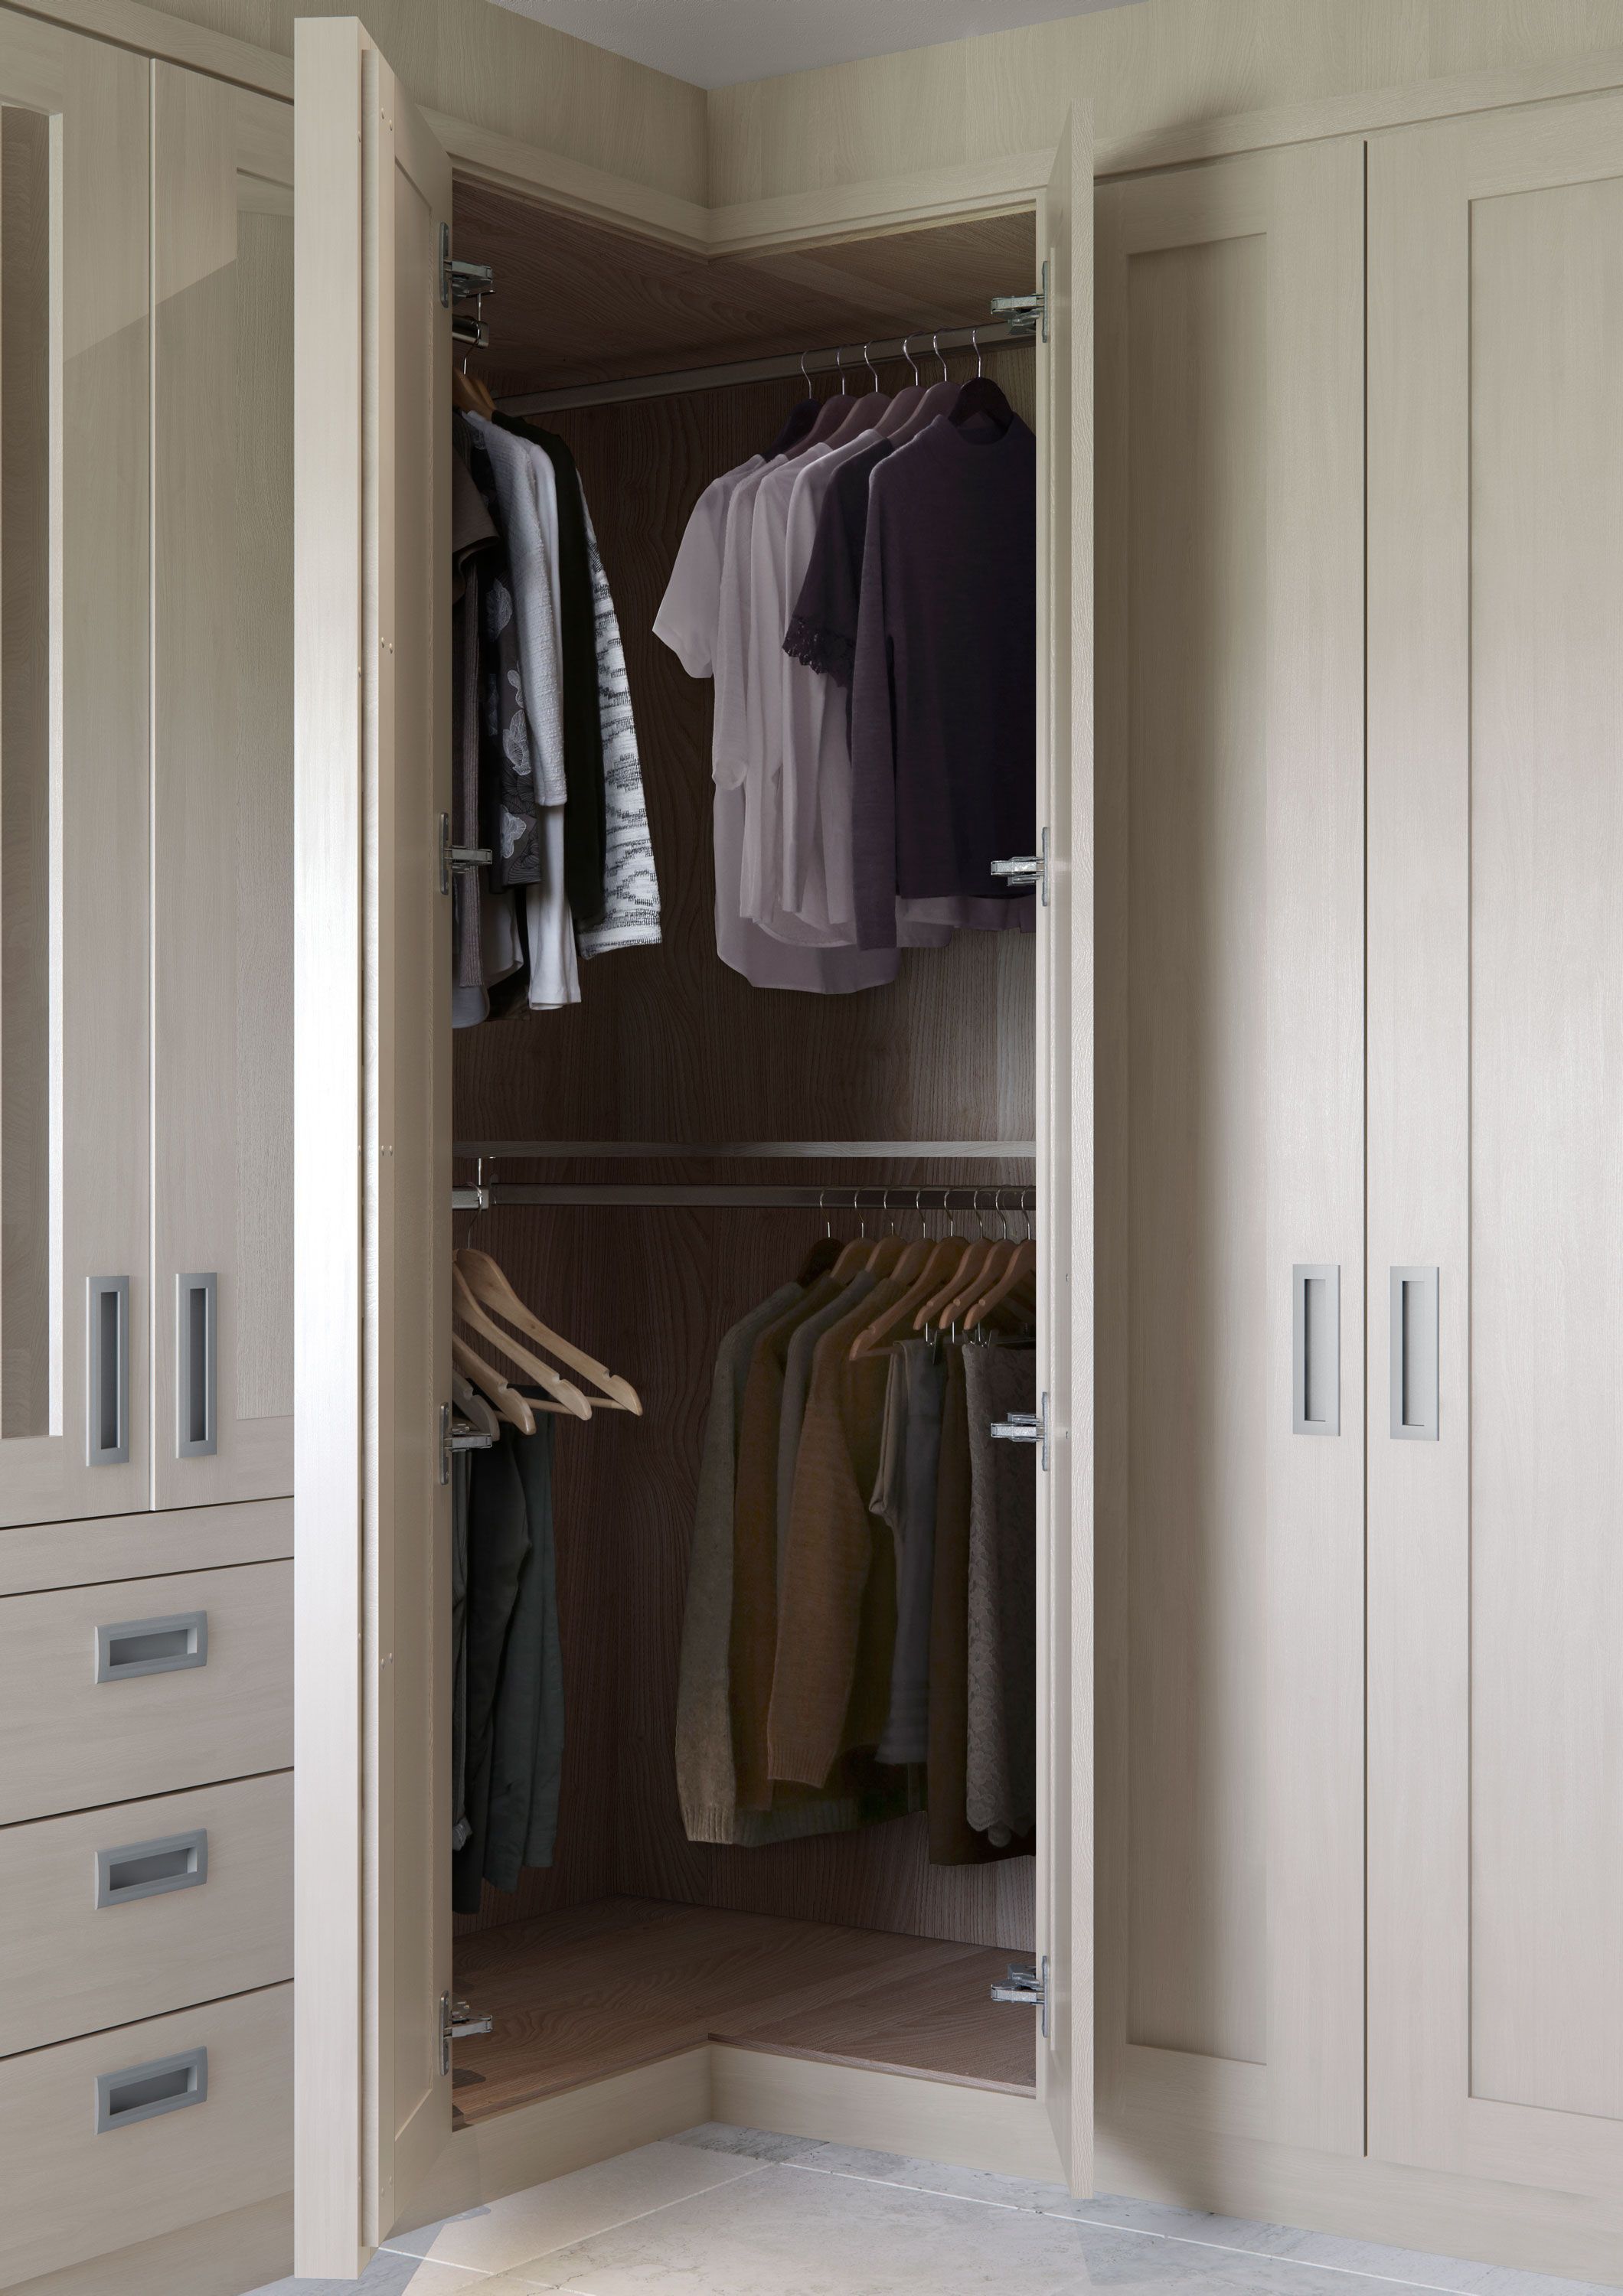 Make The Most Of The Corner Space With This Angled Double Hanging Rail. |  Corner Wardrobe, Corner Wardrobe Closet, Bedroom Built In Wardrobe Pertaining To Tall Double Hanging Rail Wardrobes (Photo 10 of 15)